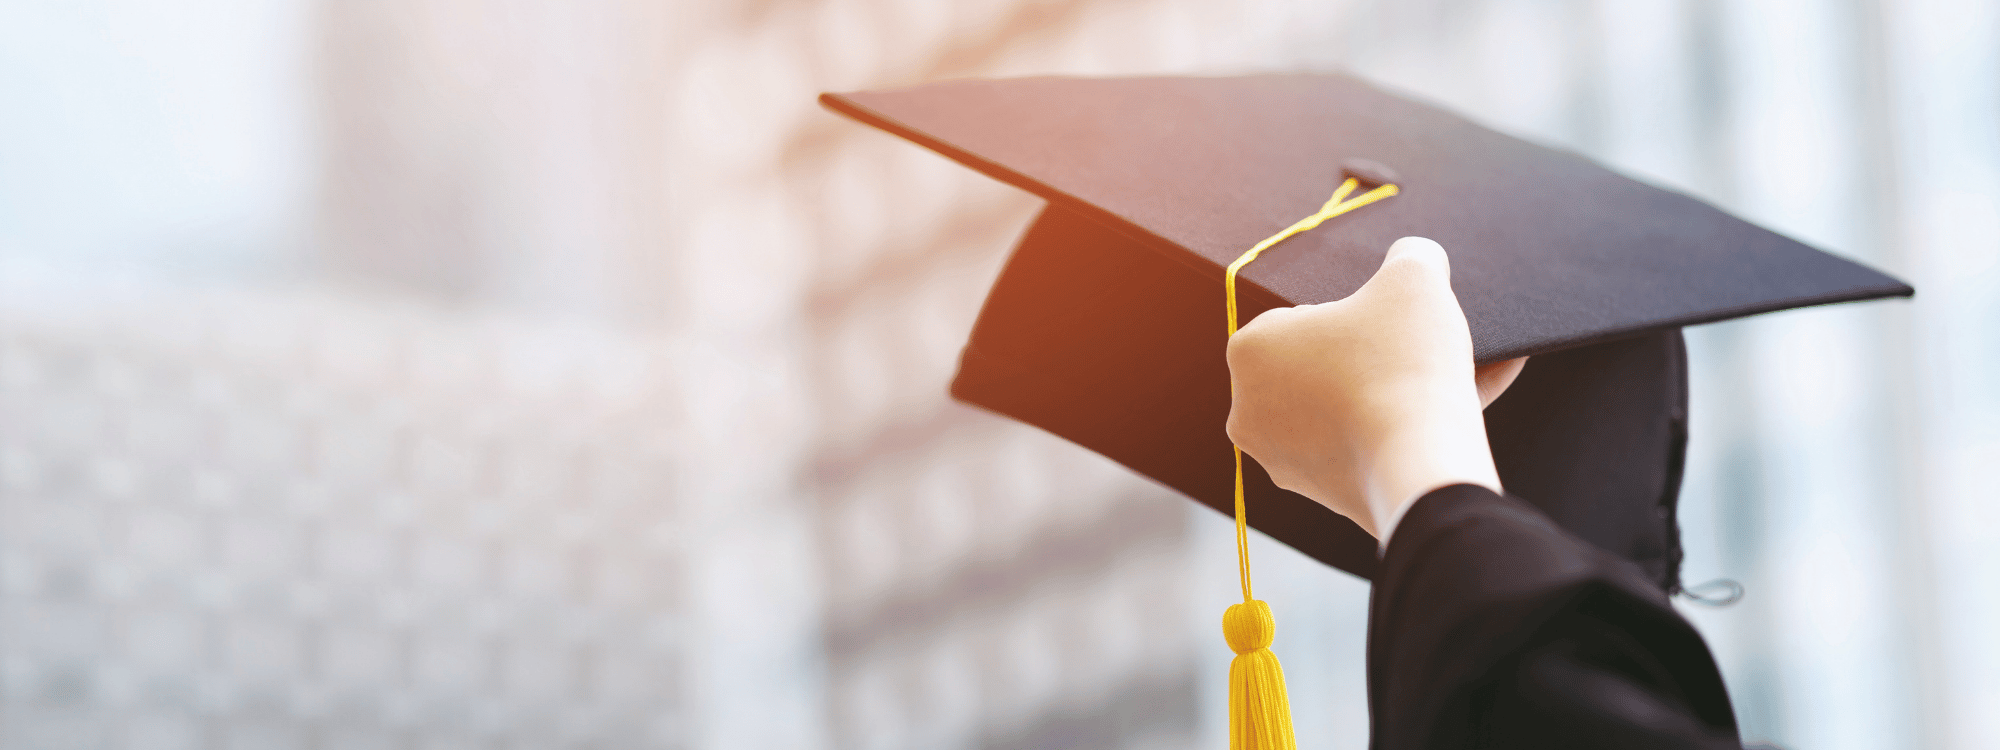 Diploma requirements are changing in April 2022 – and if you are a current or future Southpac student, this news could affect you.